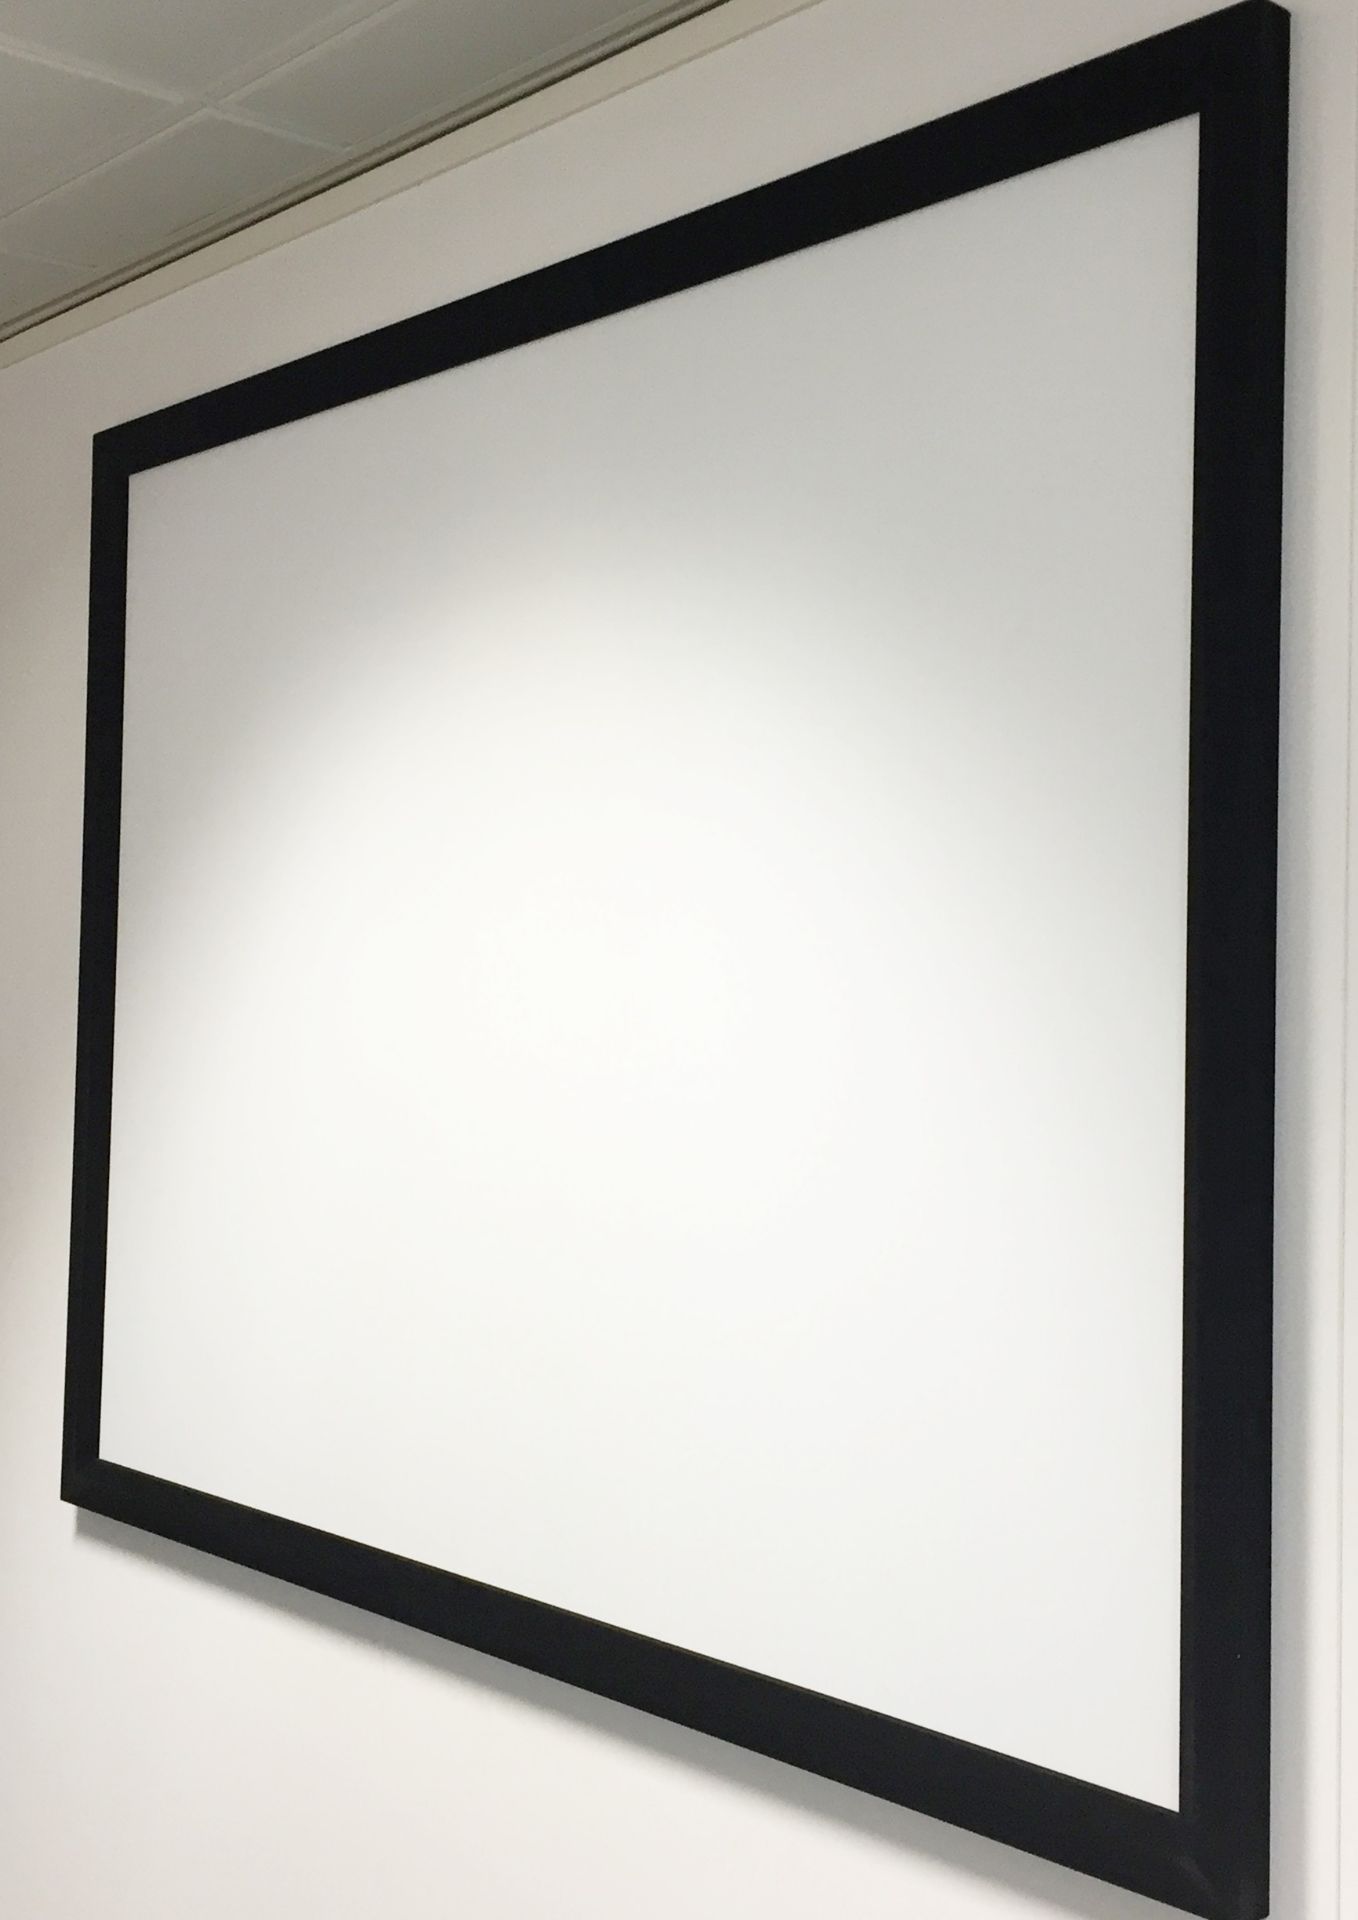 1 x Fixed Frame CINEMATIC Projection Screen - Large Size With Deep Black Velvet Surround - Size - Image 4 of 4